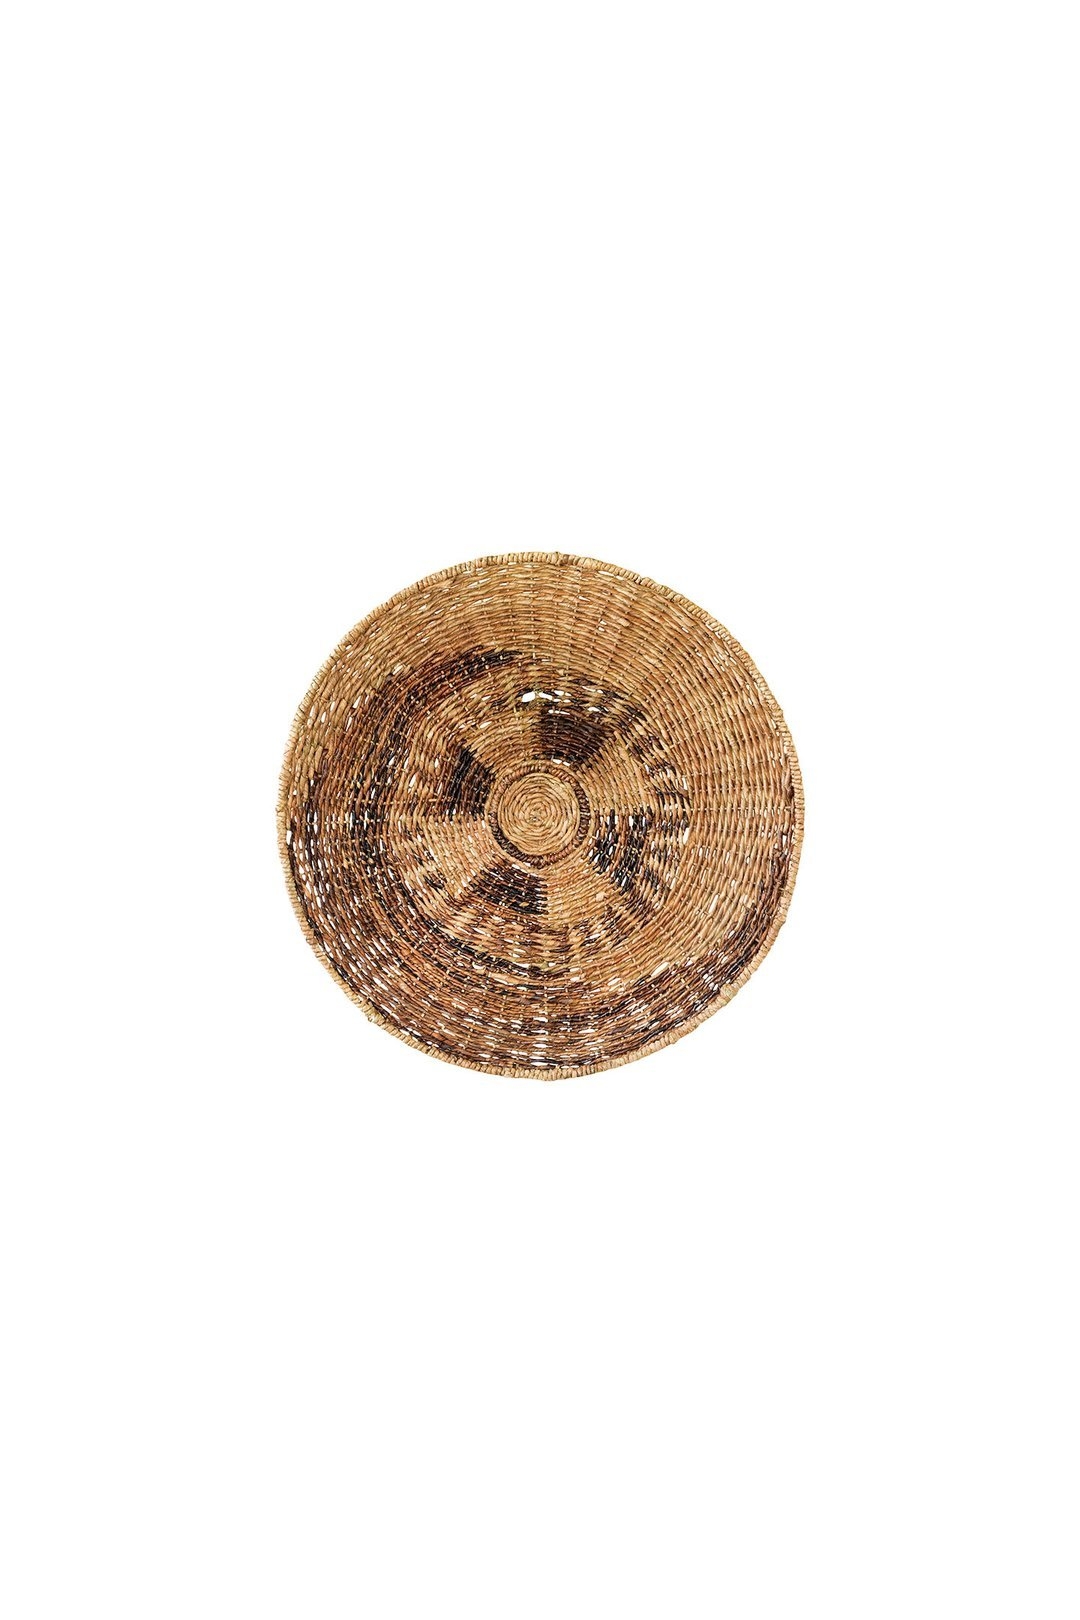 Seagrass Wall Basket - Image 0